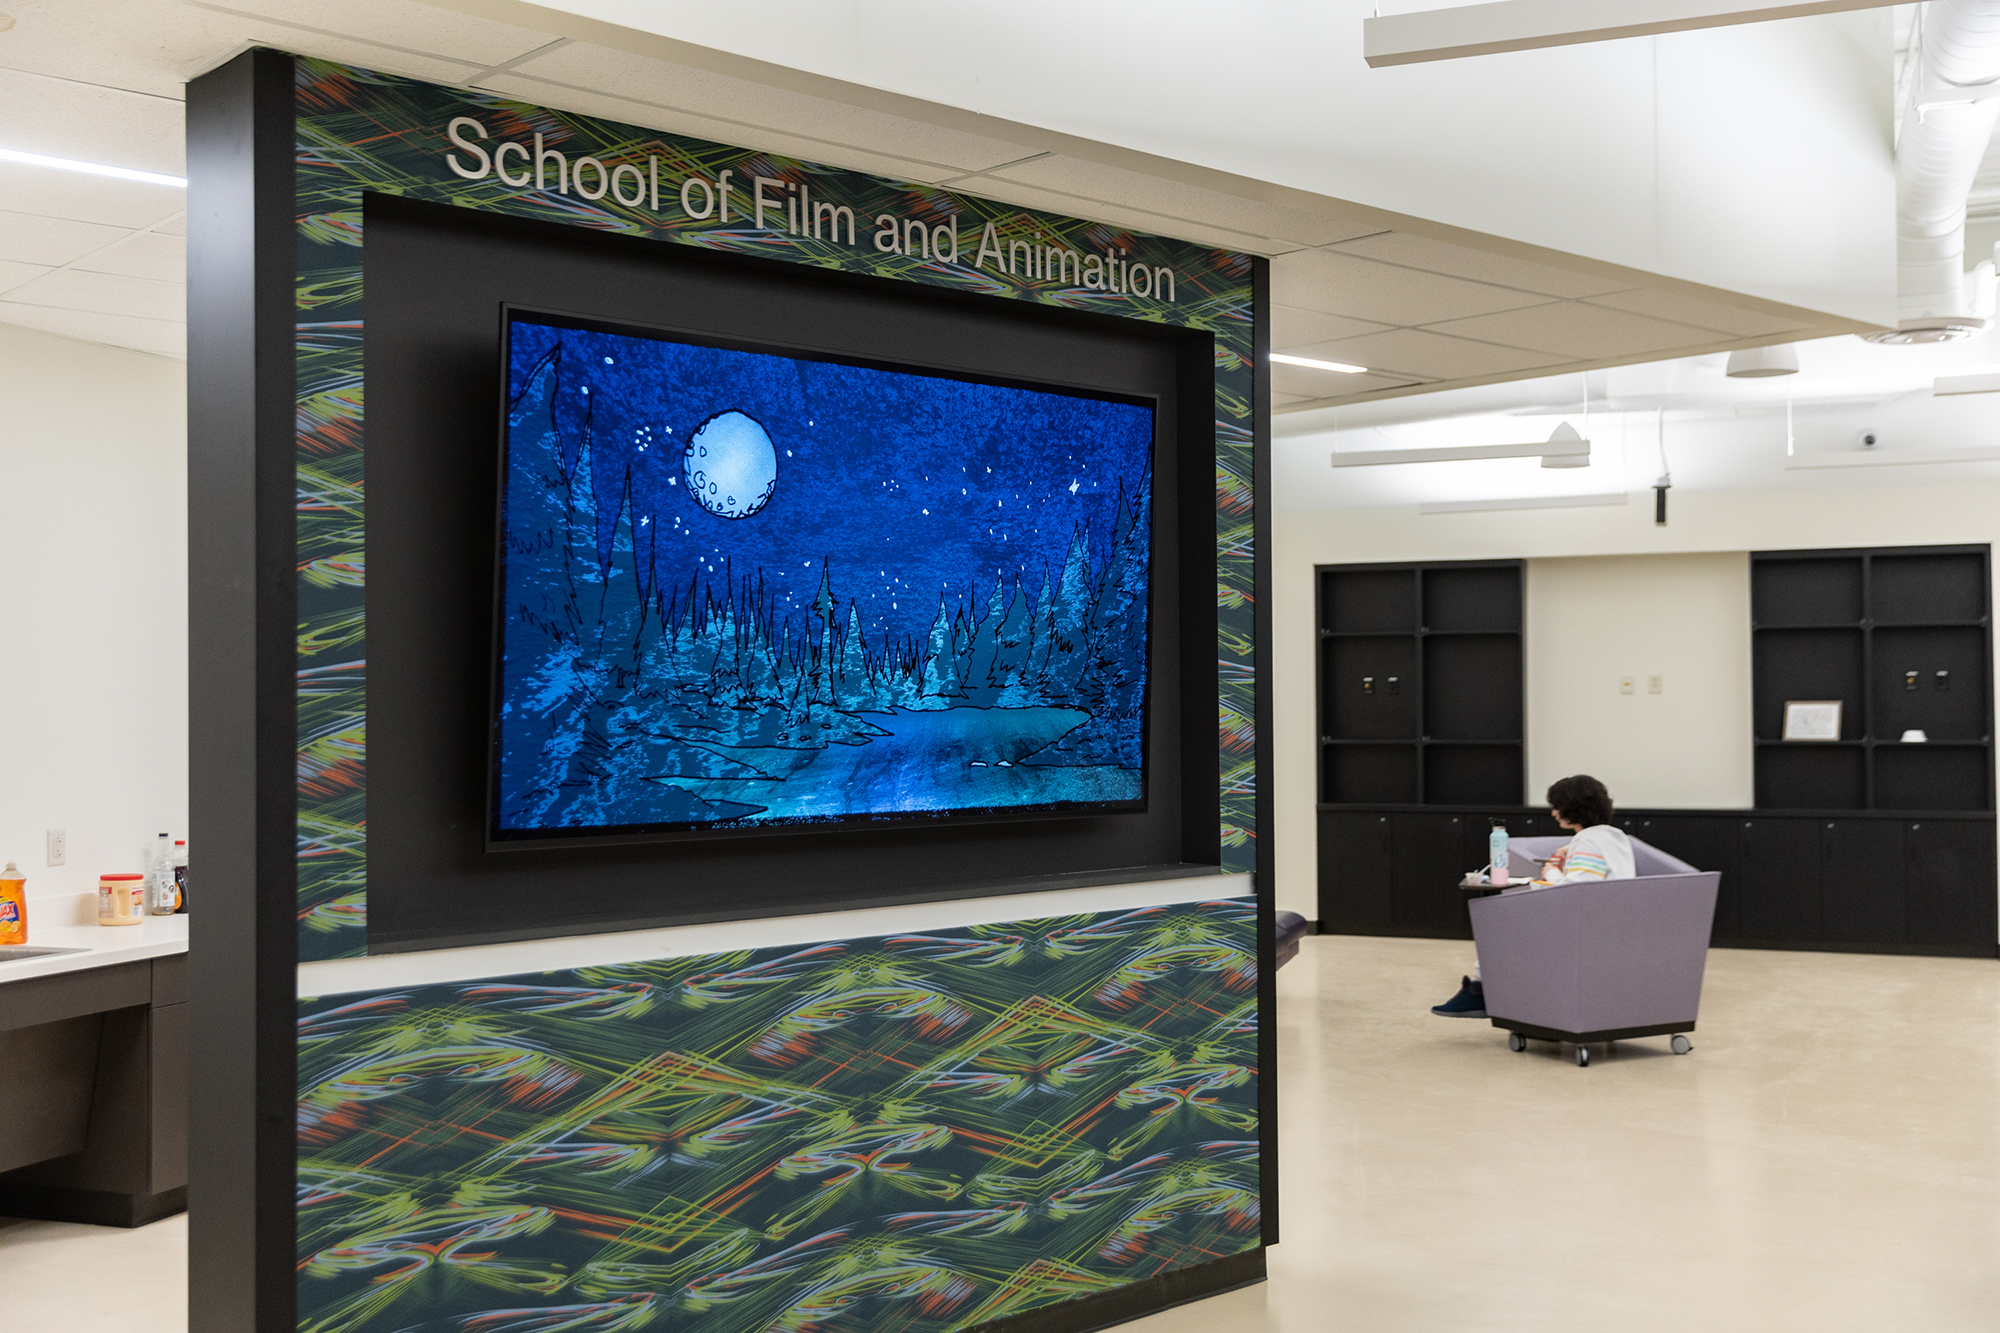 A lobby area with a screen full of content.